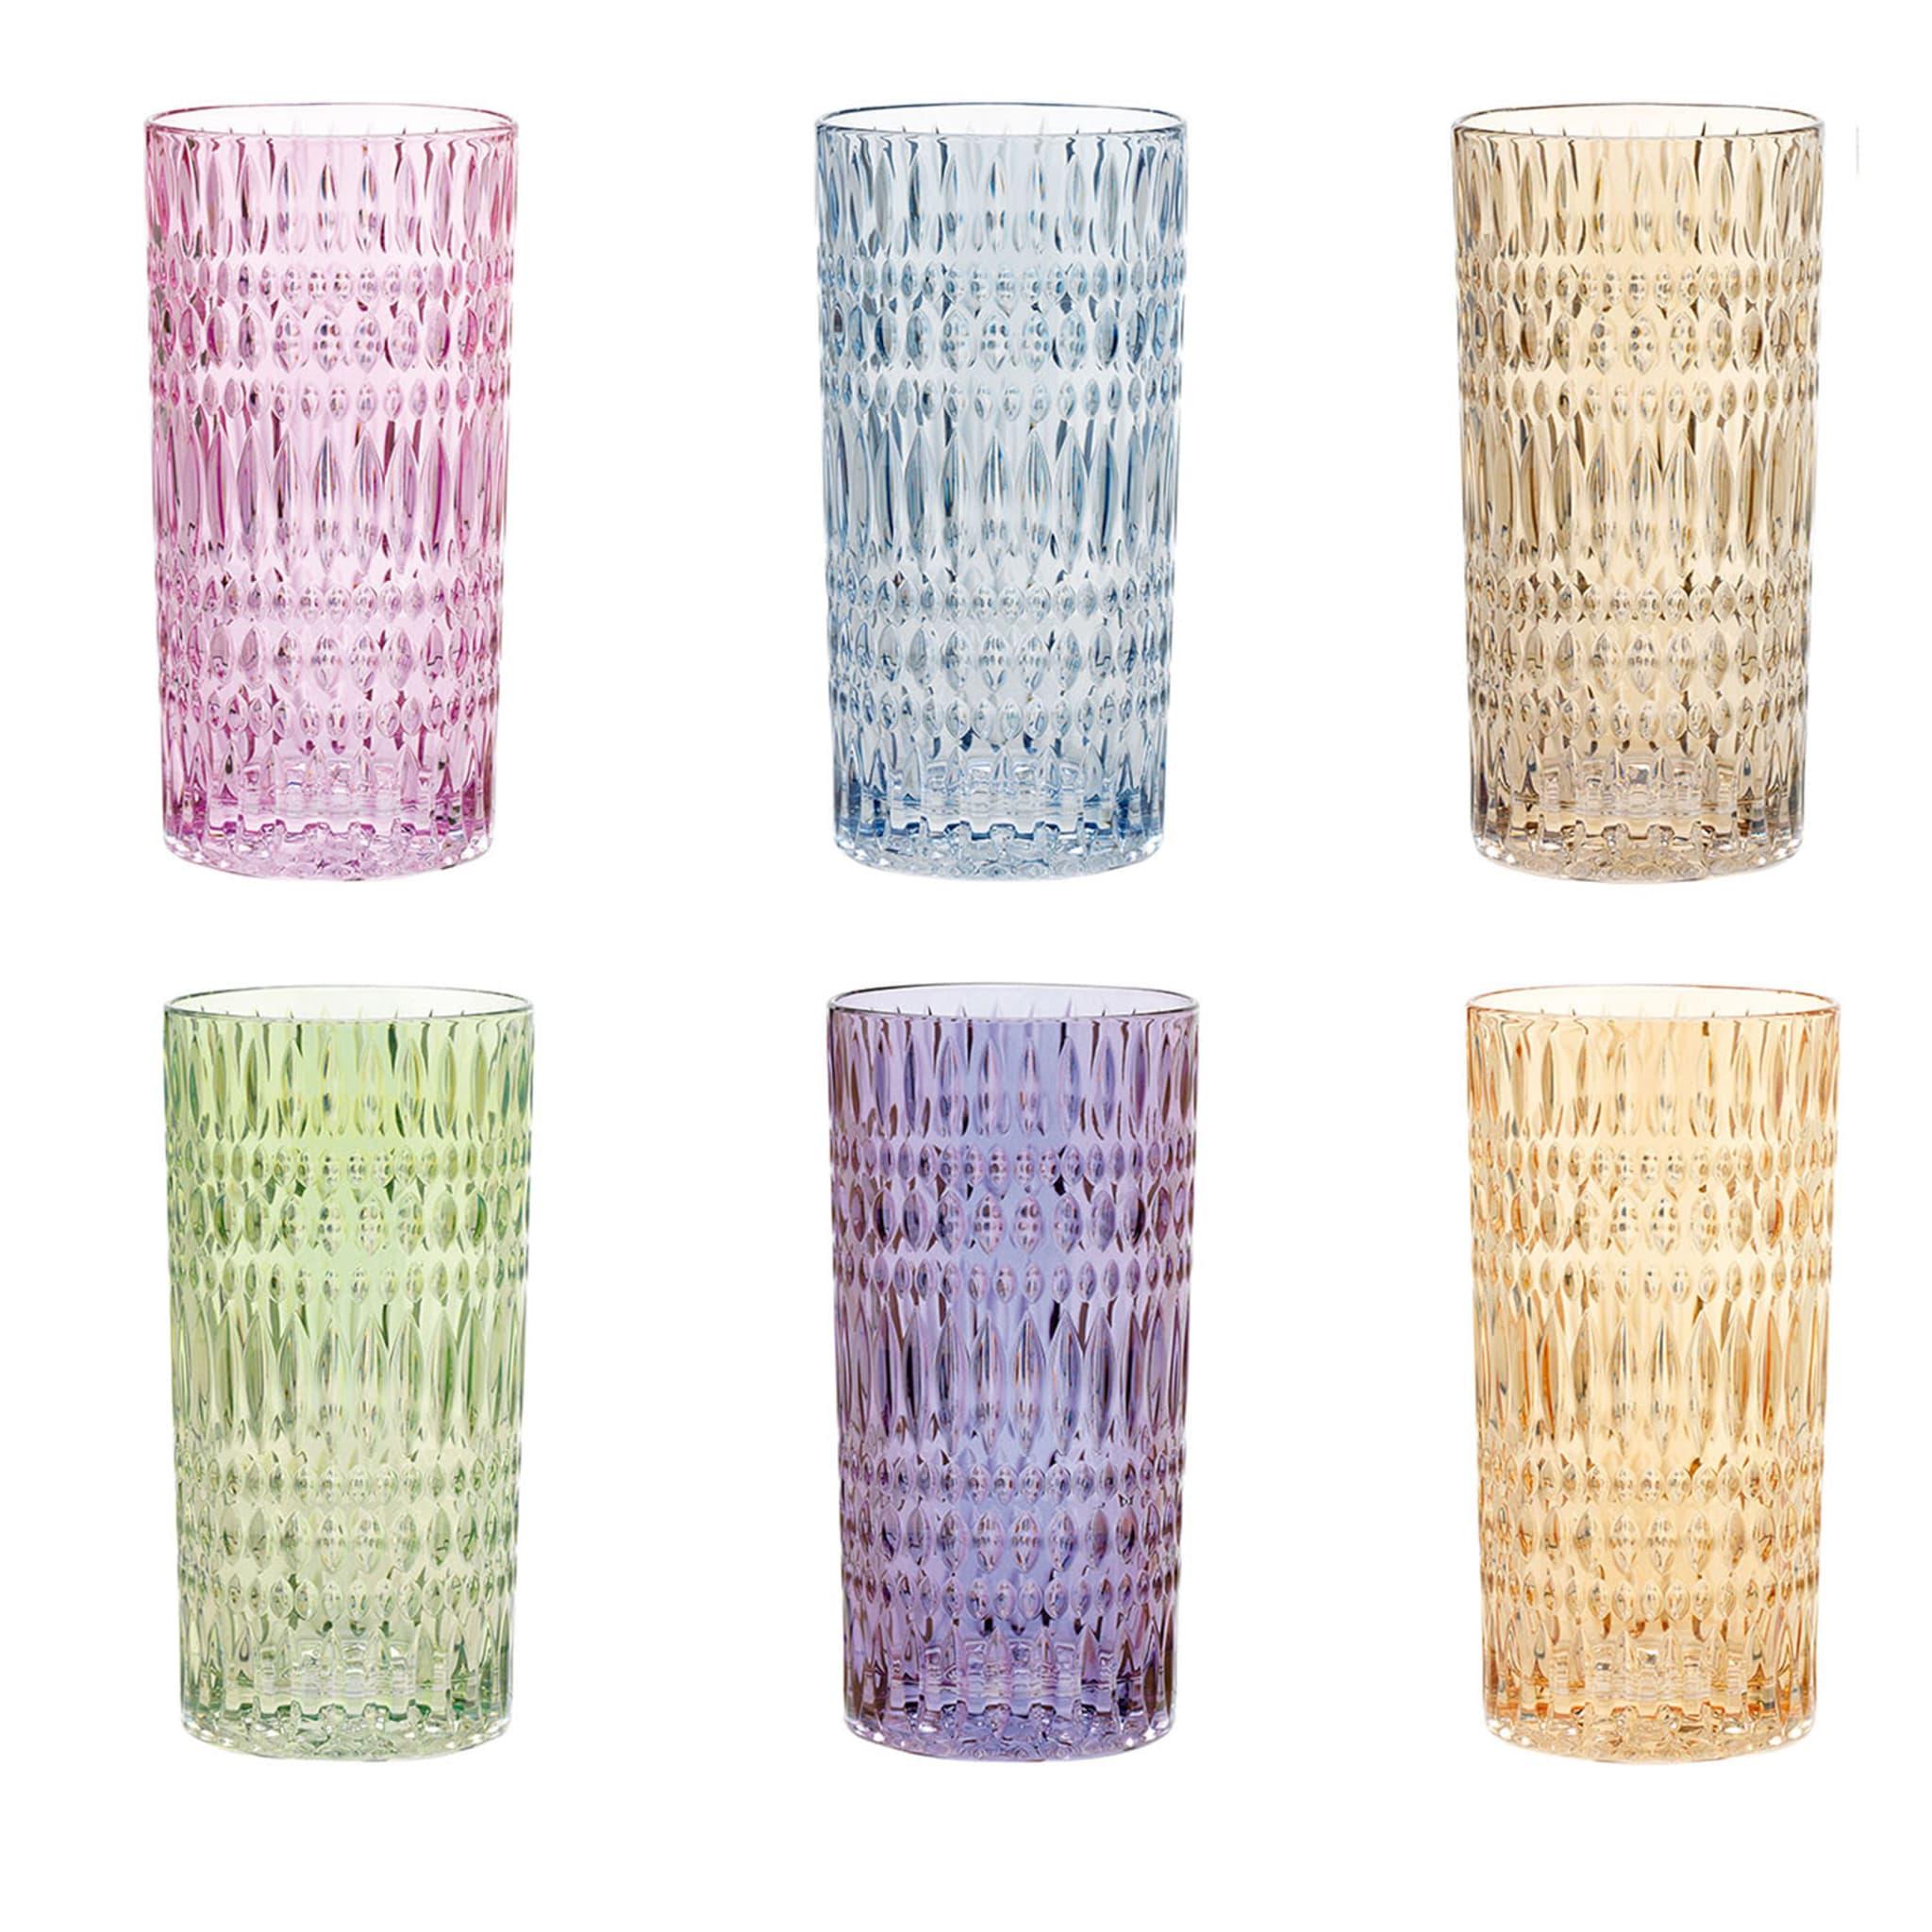 Stupefying manual etchings distinguish the six drinking glasses composing this colorful set. Fashioned of fine glass, each piece sports a vibrant monochromatic look - azure, beige, pink, yellow, purple, and green, respectively - making this set as